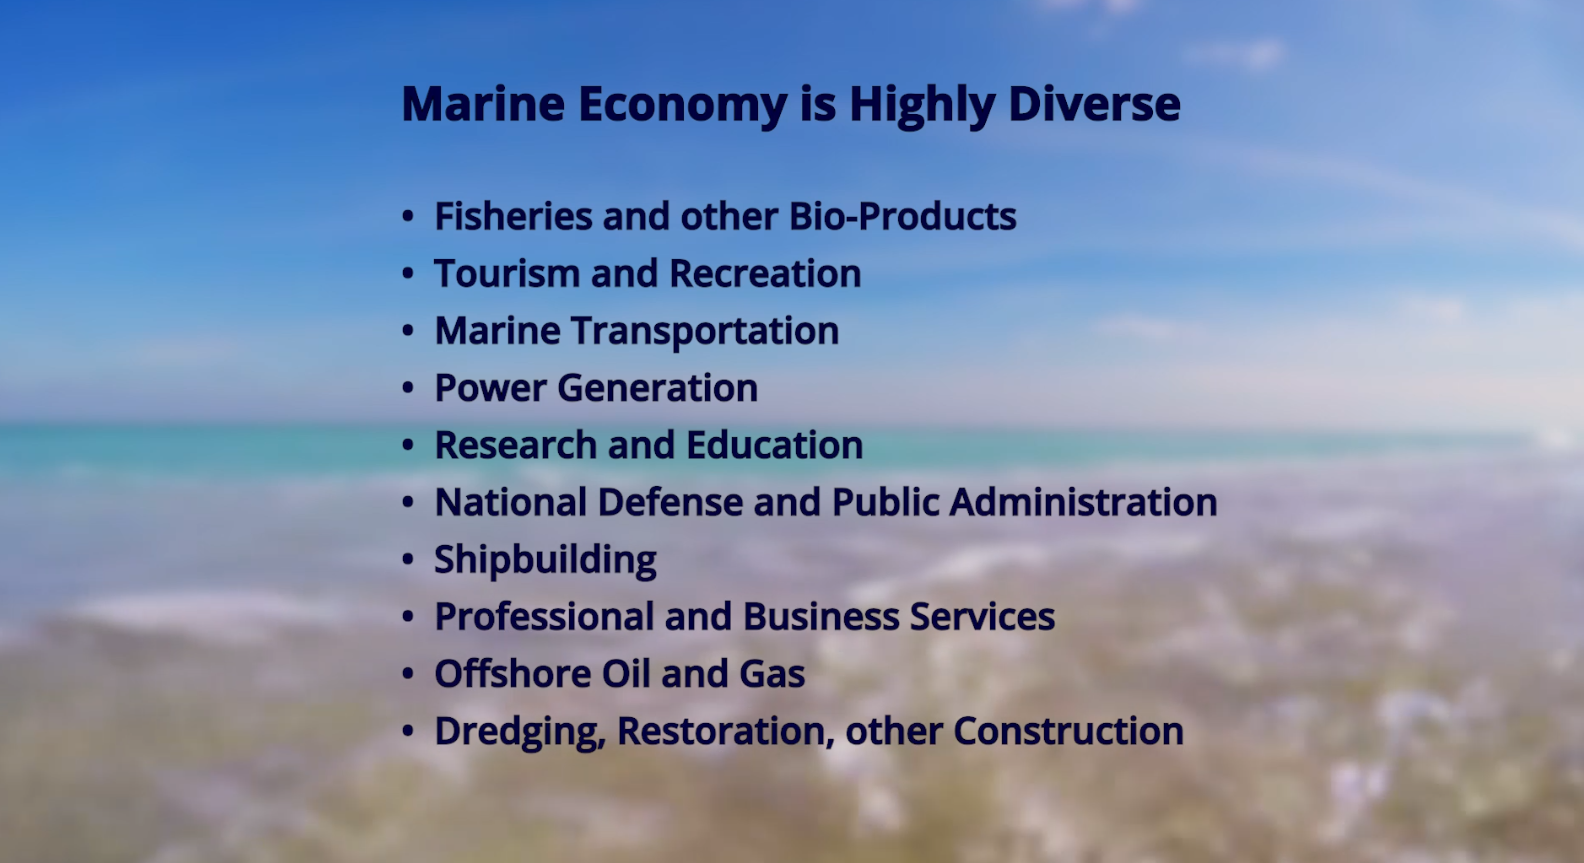 The marine economy is highly diverse. 